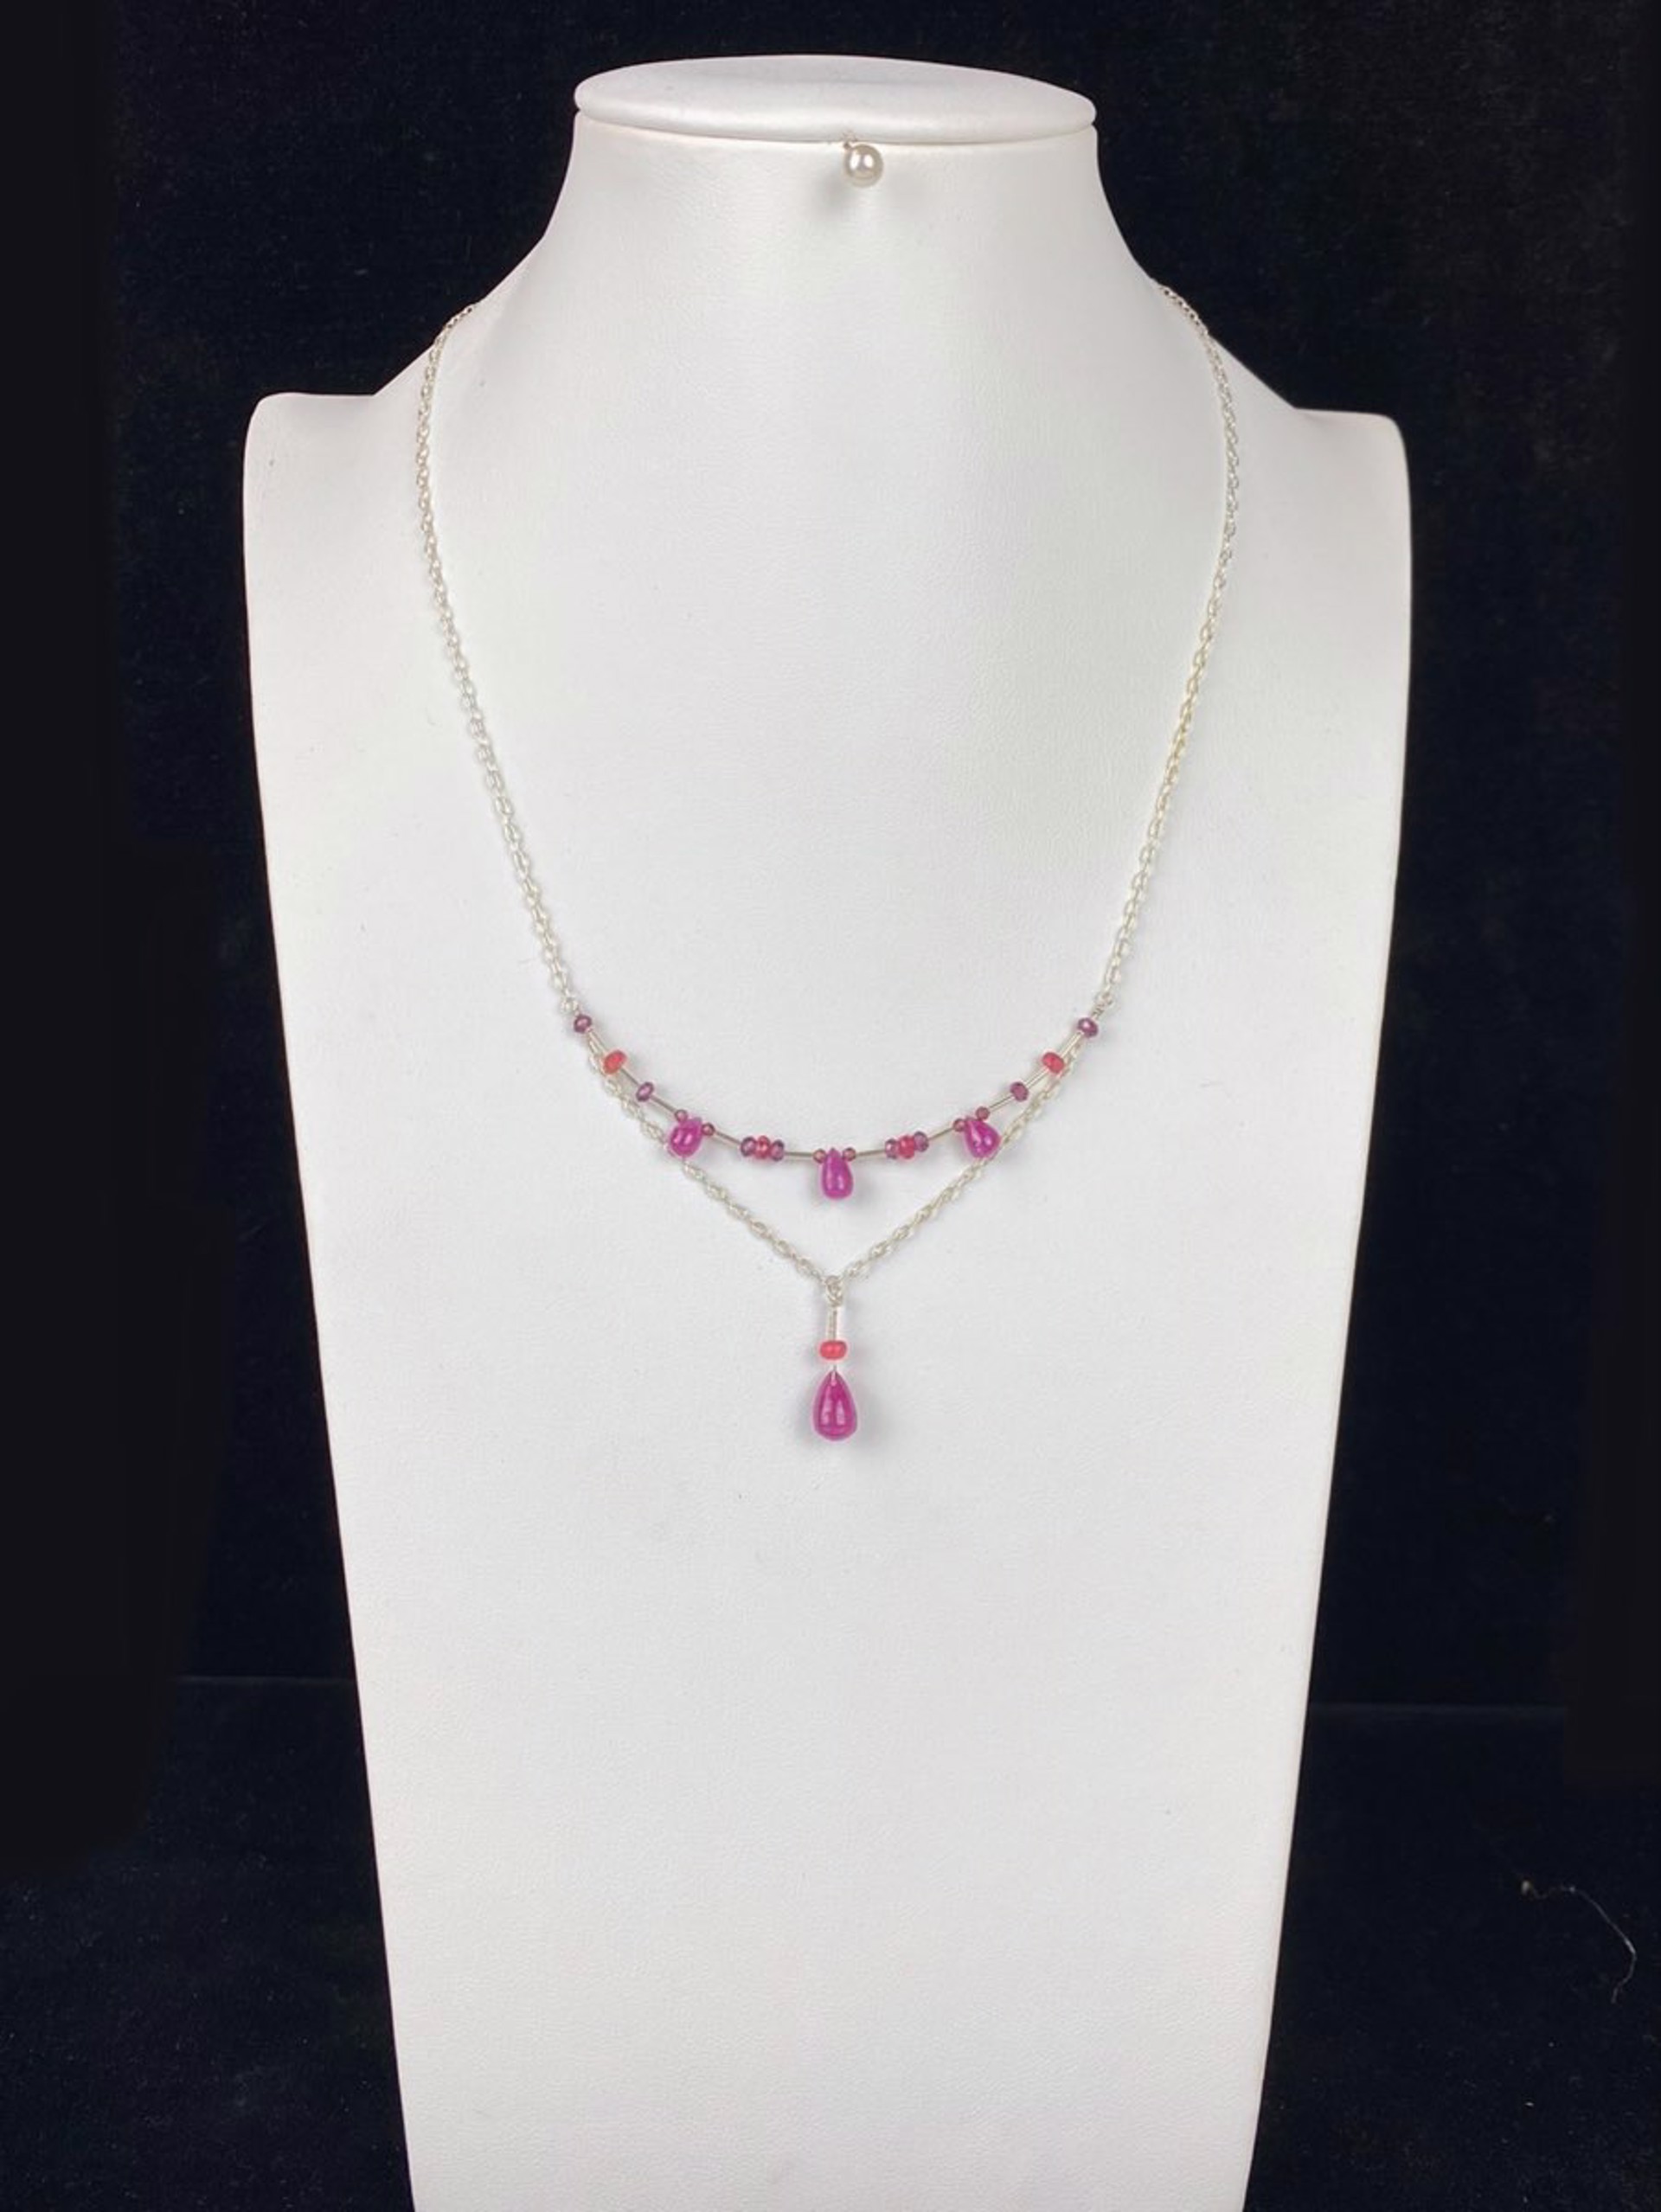 Ruby, Garnet, Pink Spinel, and Sterling Silver Double Necklace by Lisa Kelley